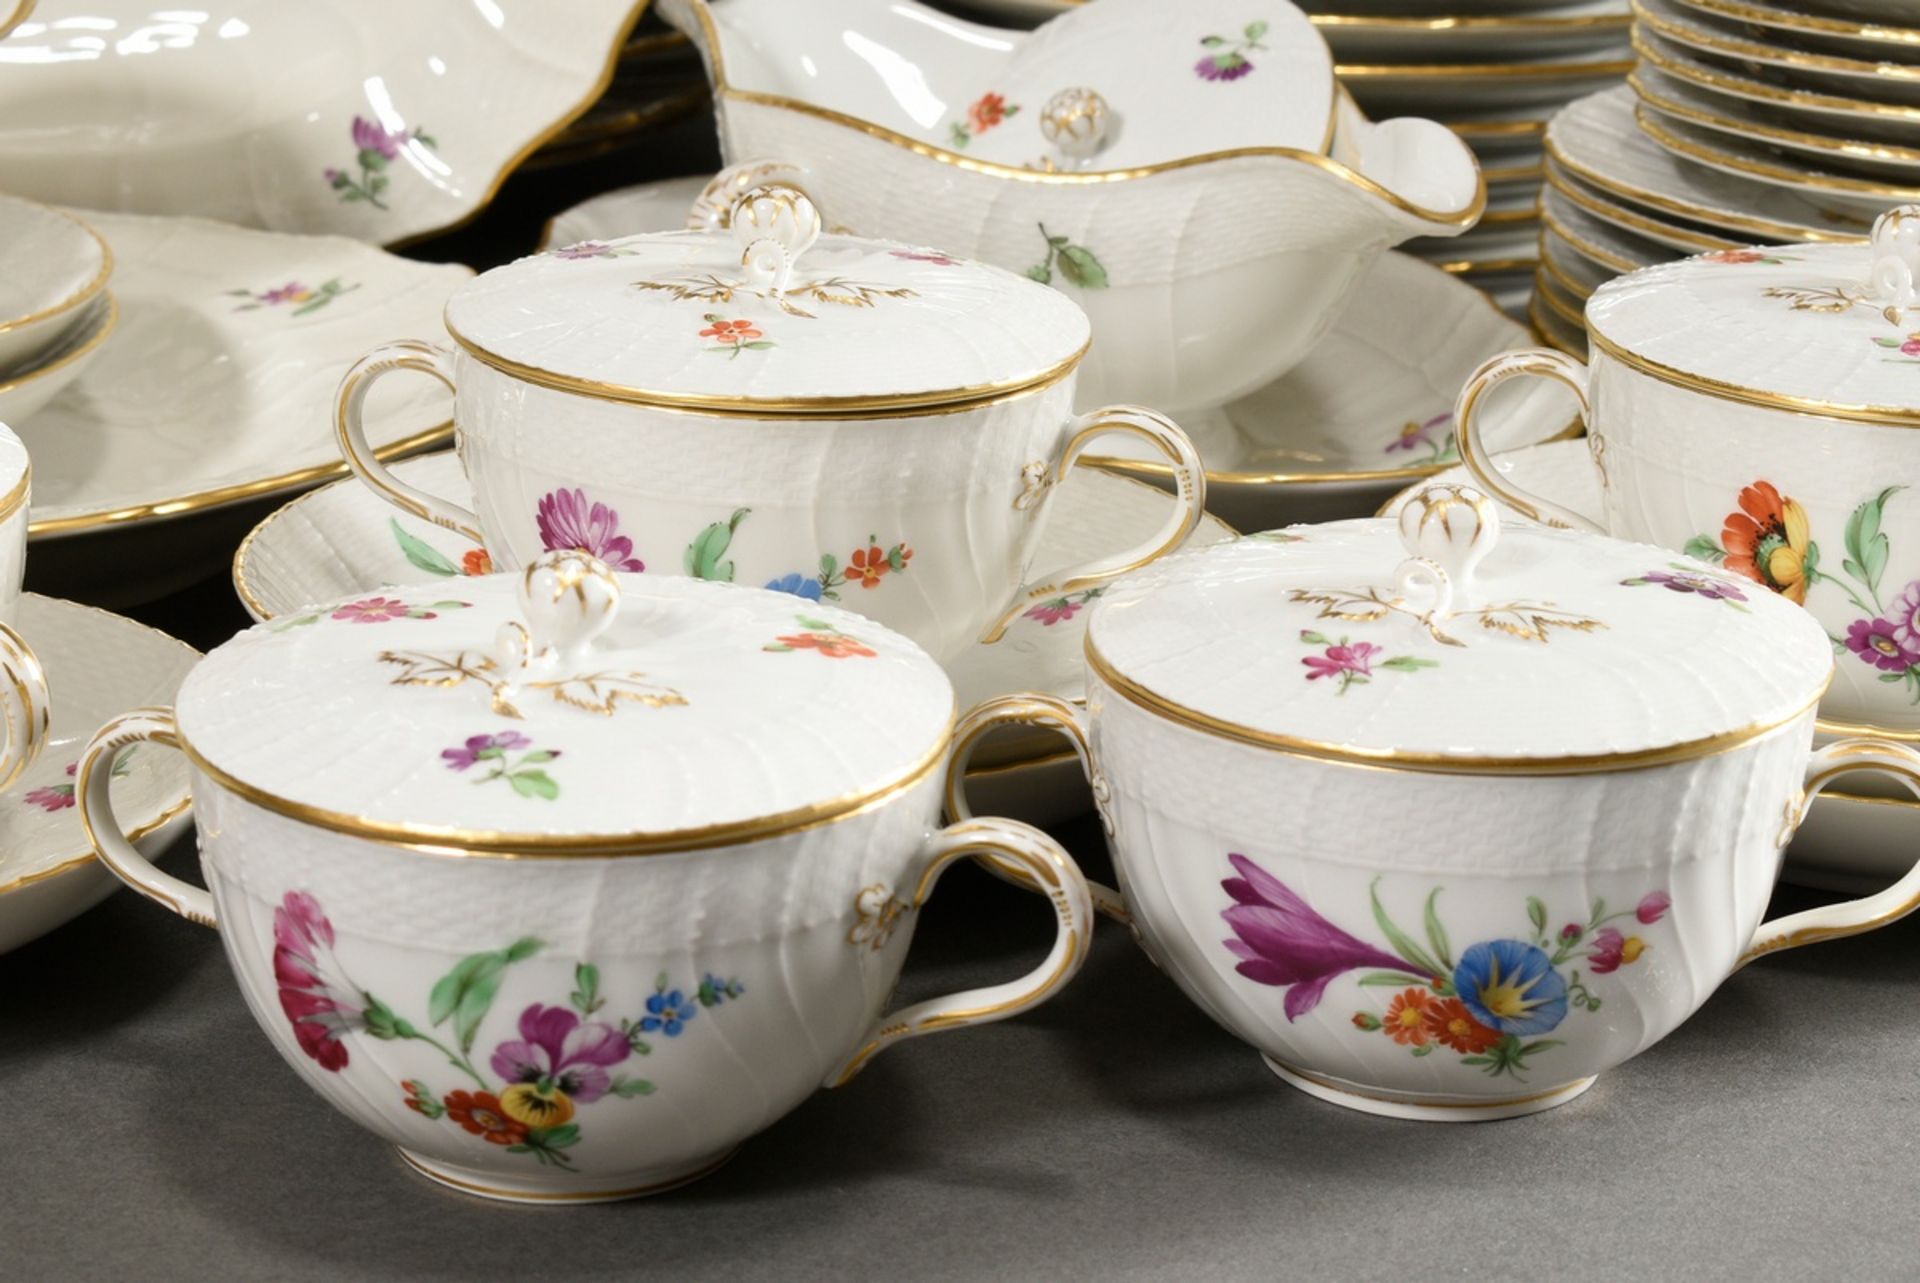 114 pieces KPM dinner service "Neuosier" with polychrome painting "flowers and insects" consisting  - Image 4 of 14